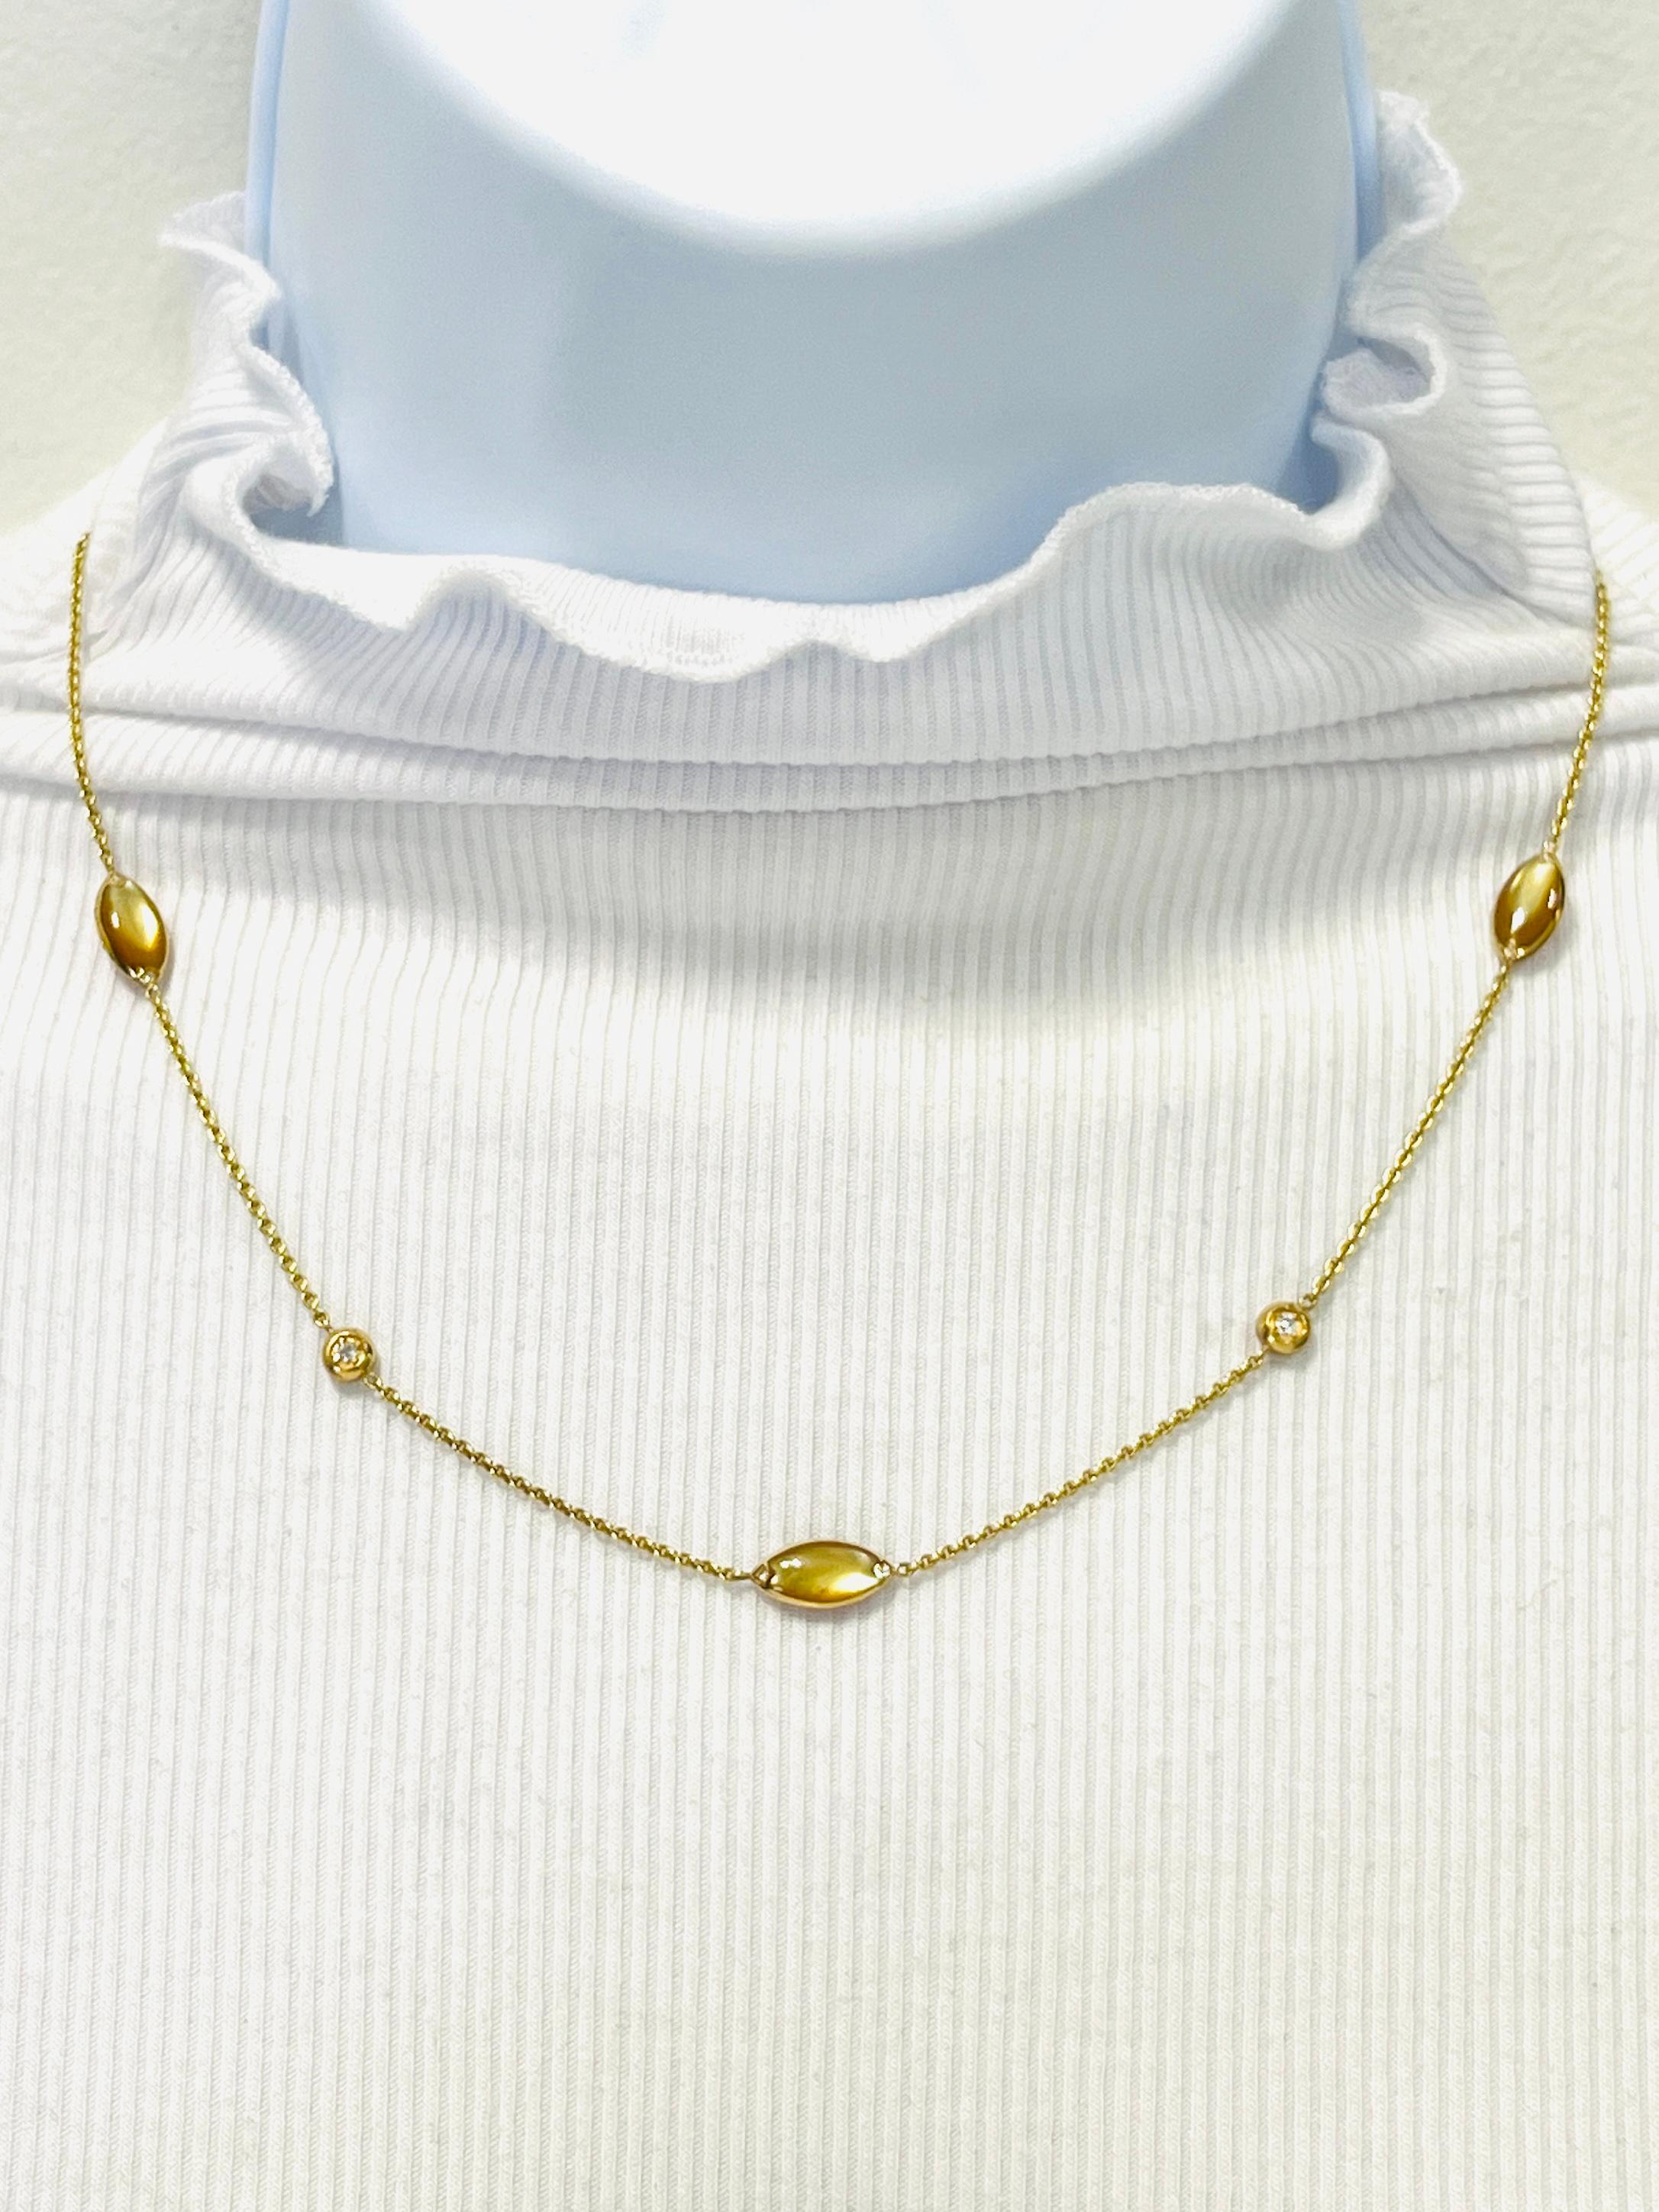 Round Cut Estate Kabana White Diamond and Color Marquise Necklace in 14K Yellow Gold For Sale